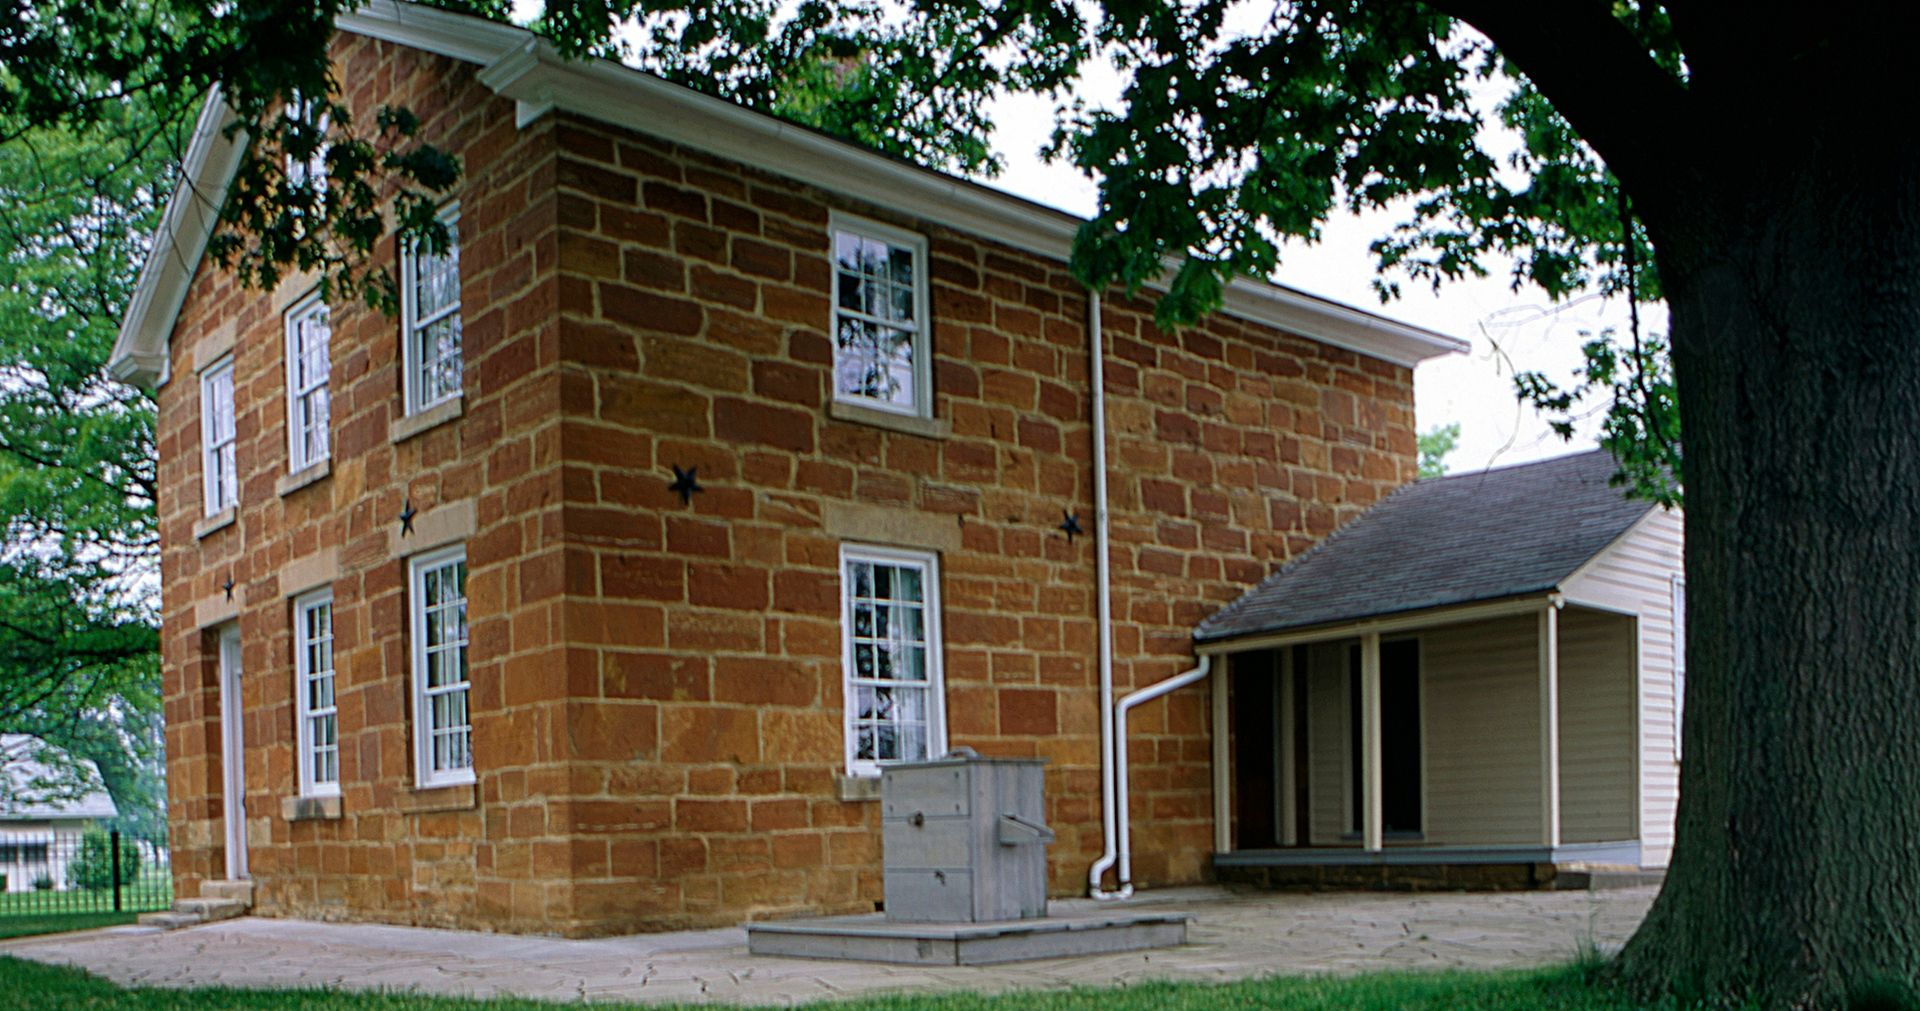 Exterior view of Carthage Jail.